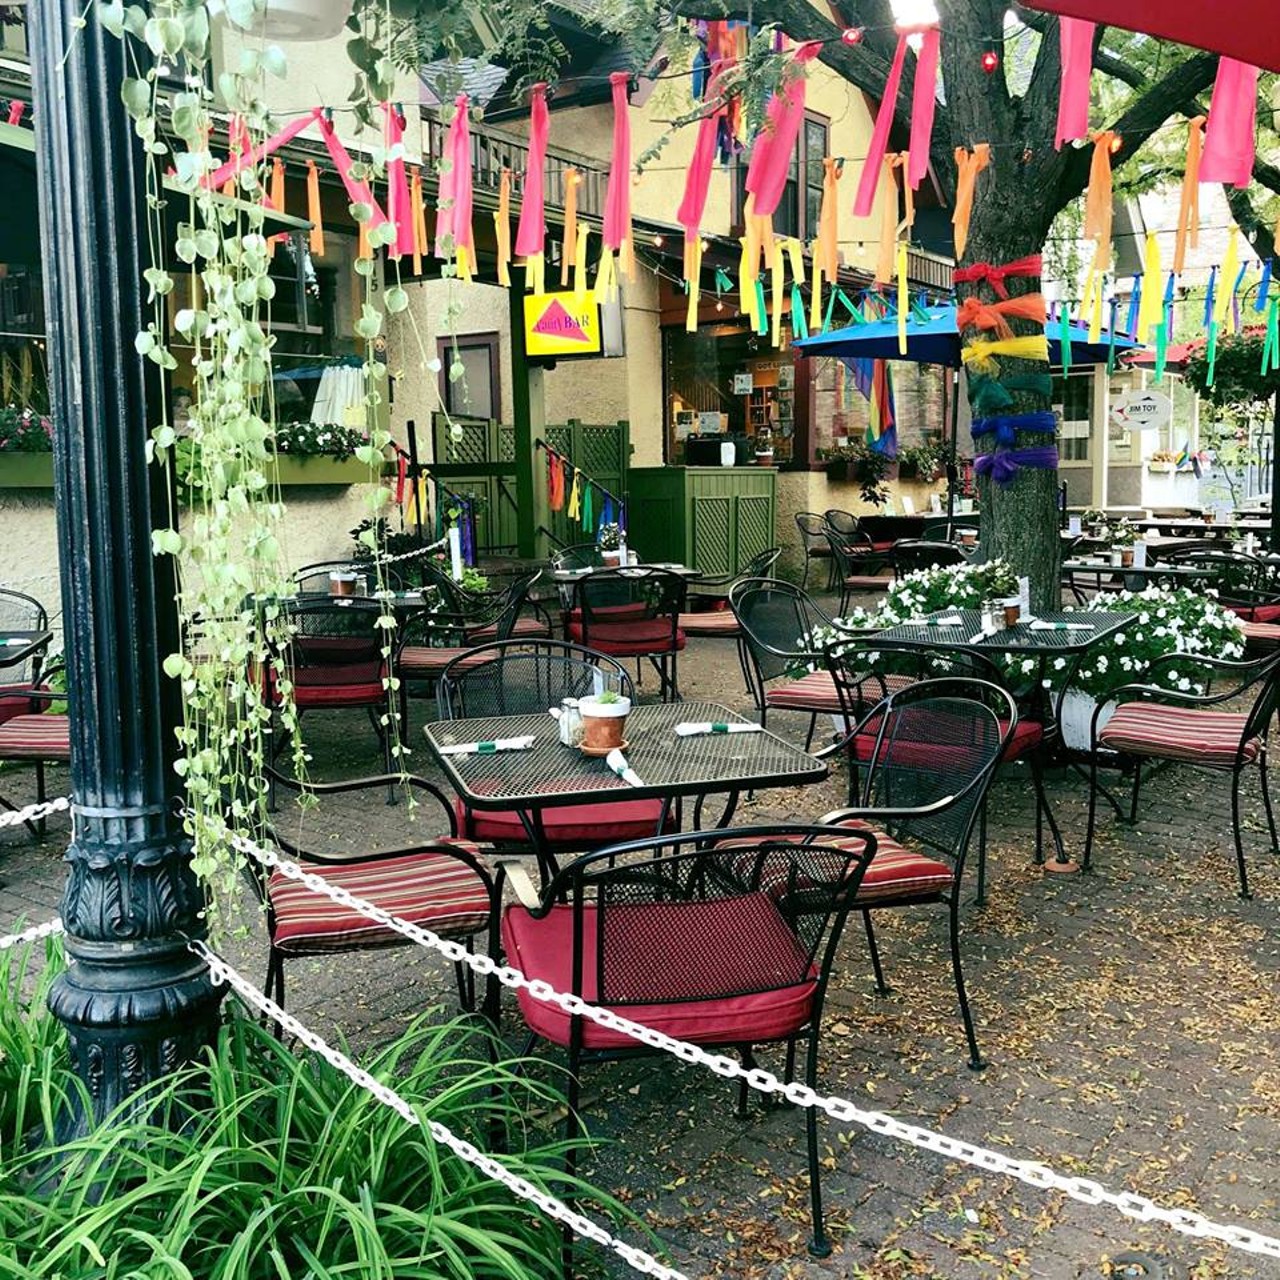 Aut Bar
Mexican food on a sunny and quiet courtyard patio &#151; it doesn&#146;t get much better than that. Aut also serves brunch on the weekends and their Mexican breakfast options will make you come back. Heads up, the second floor is 21 and older only.
315 Braun Ct., Ann Arbor
734-994-3677
Photo courtesy of Aut Bar Facebook